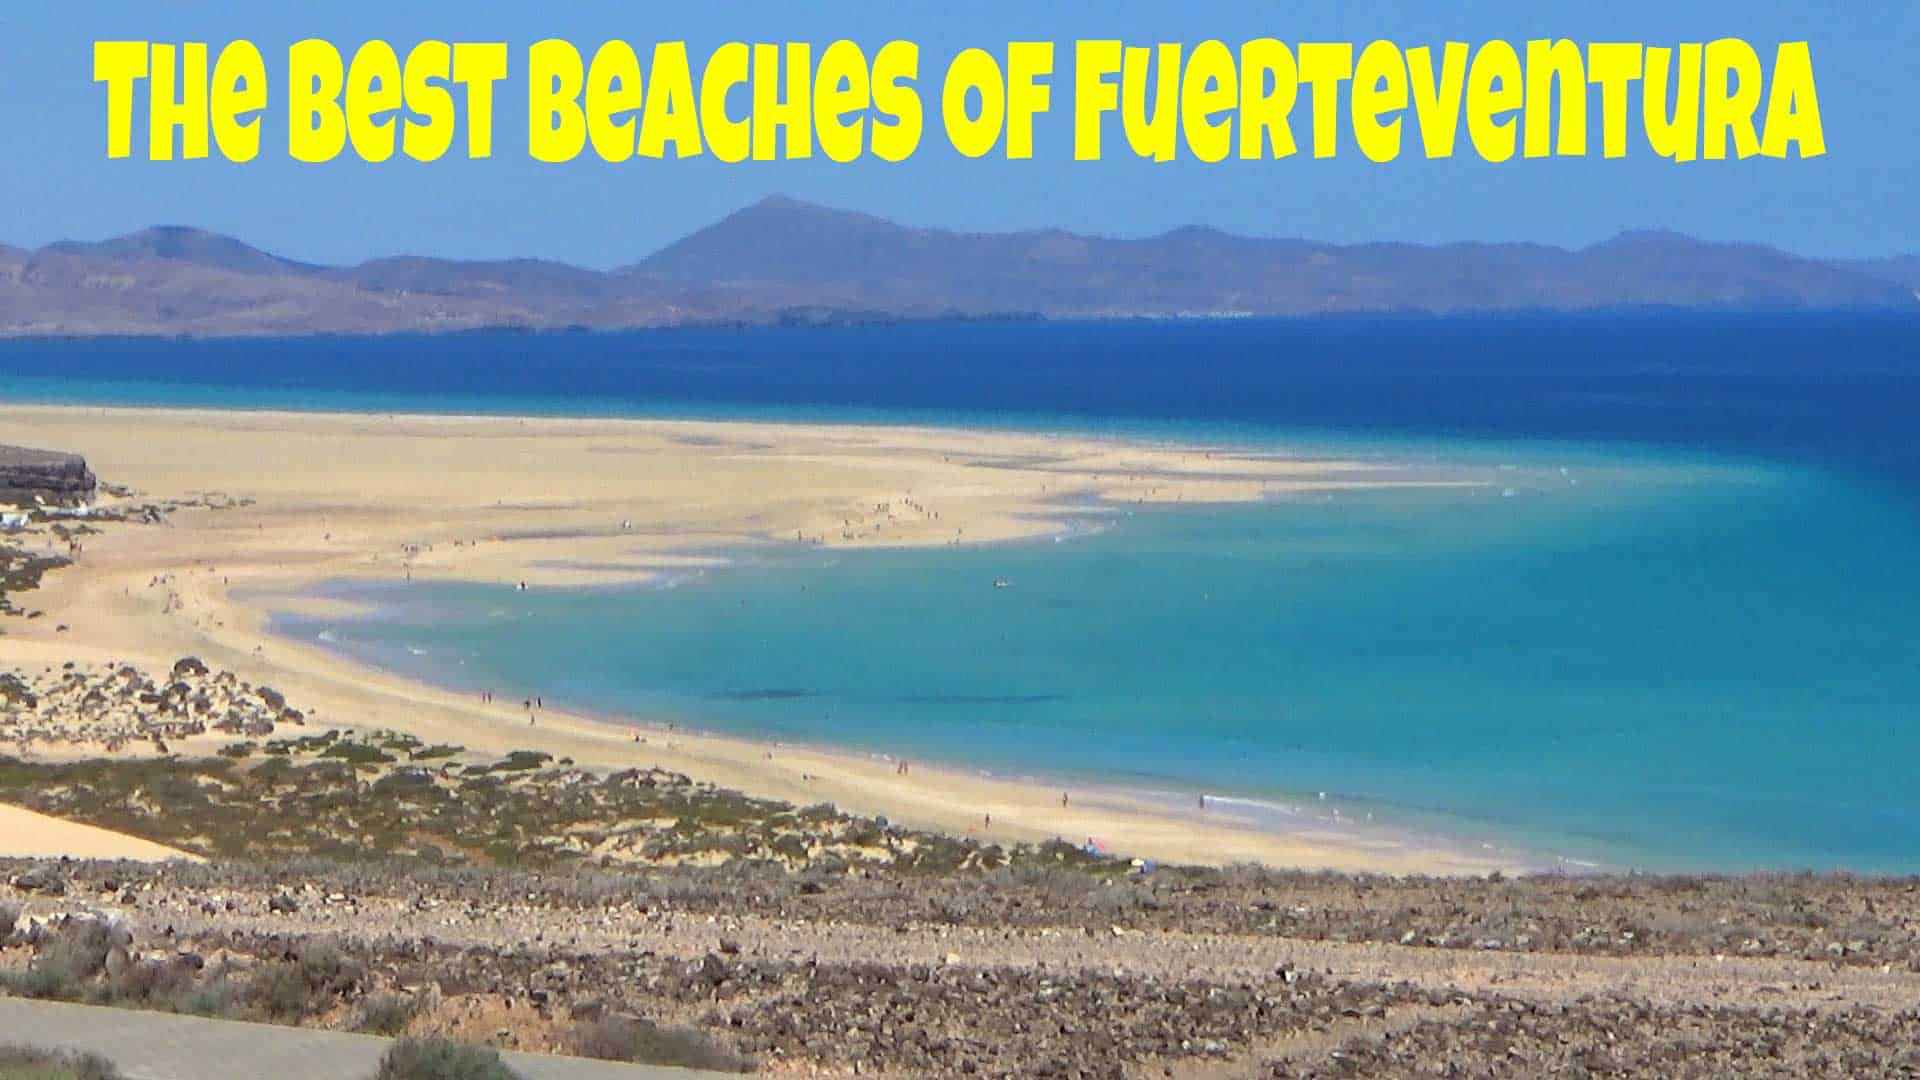 Best beaches featured image